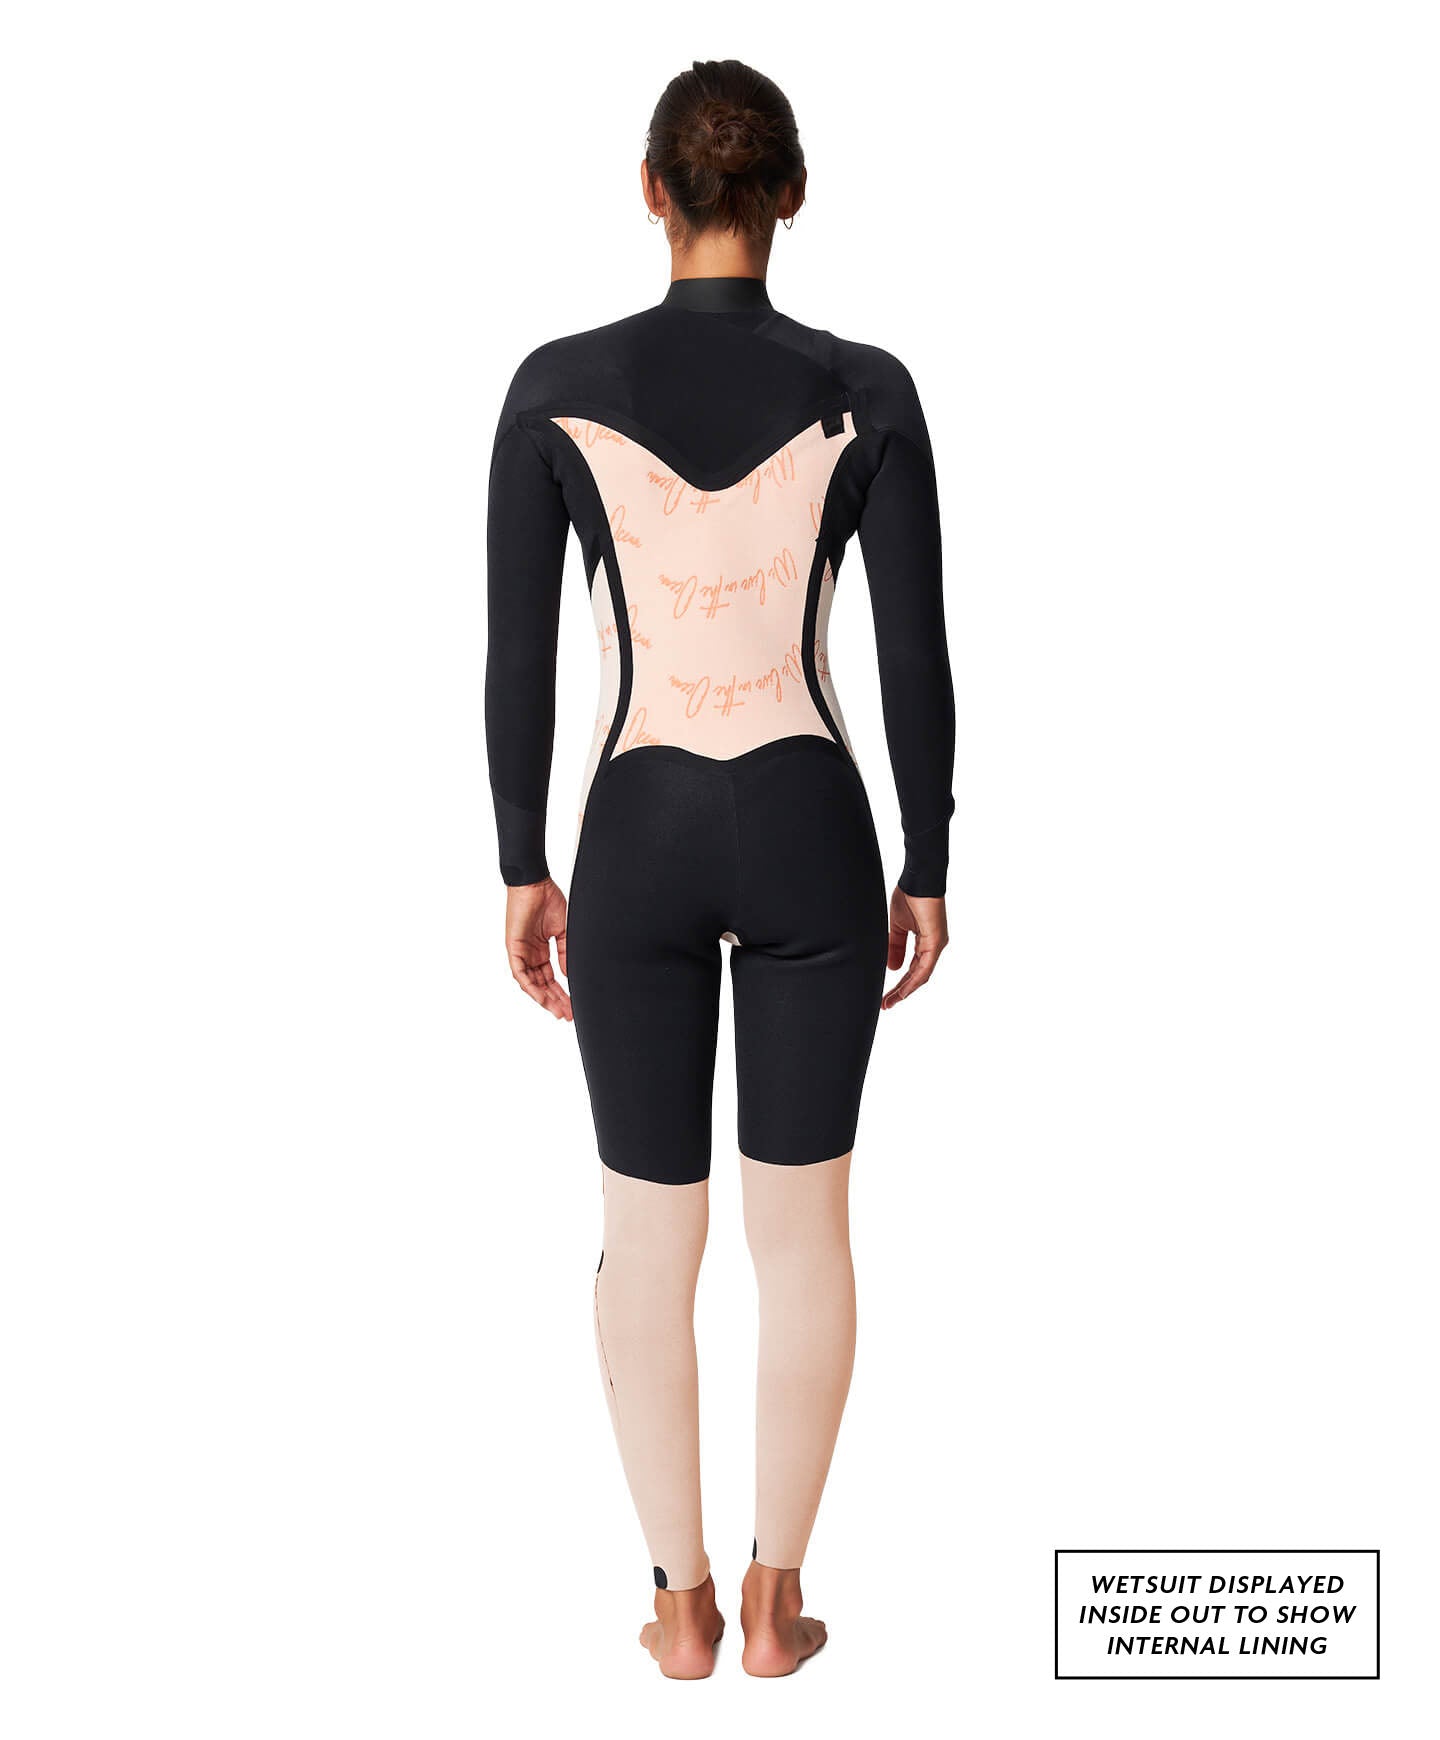 Girl's Bahia 4/3mm Steamer Chest Zip Wetsuit - Lost Palms